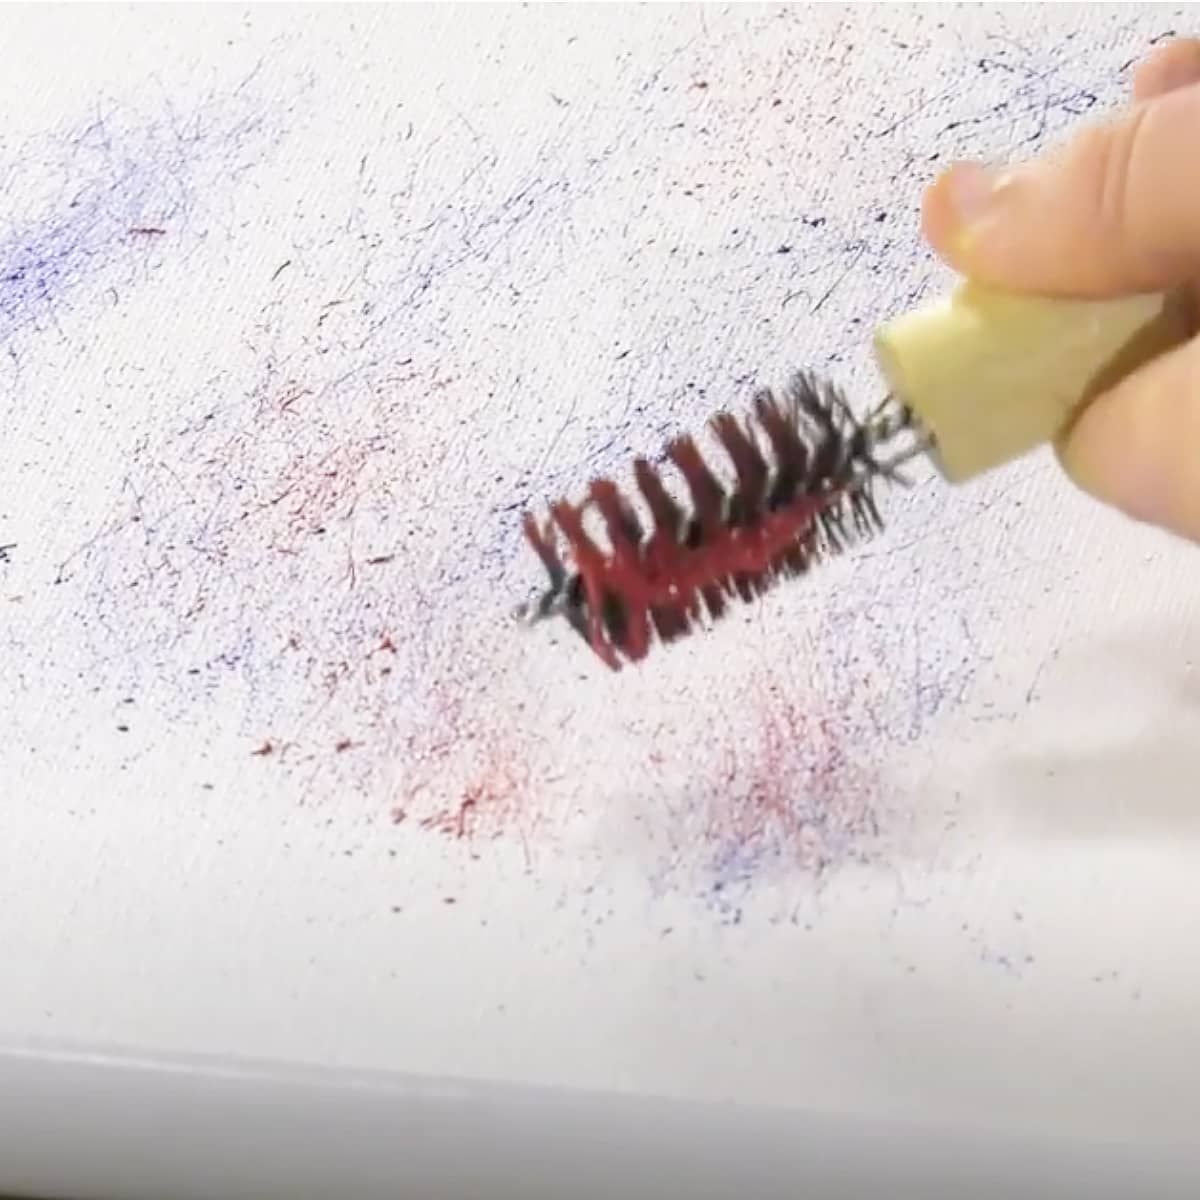 Turn metal handle and create a whole galaxy of paint drop spatters 